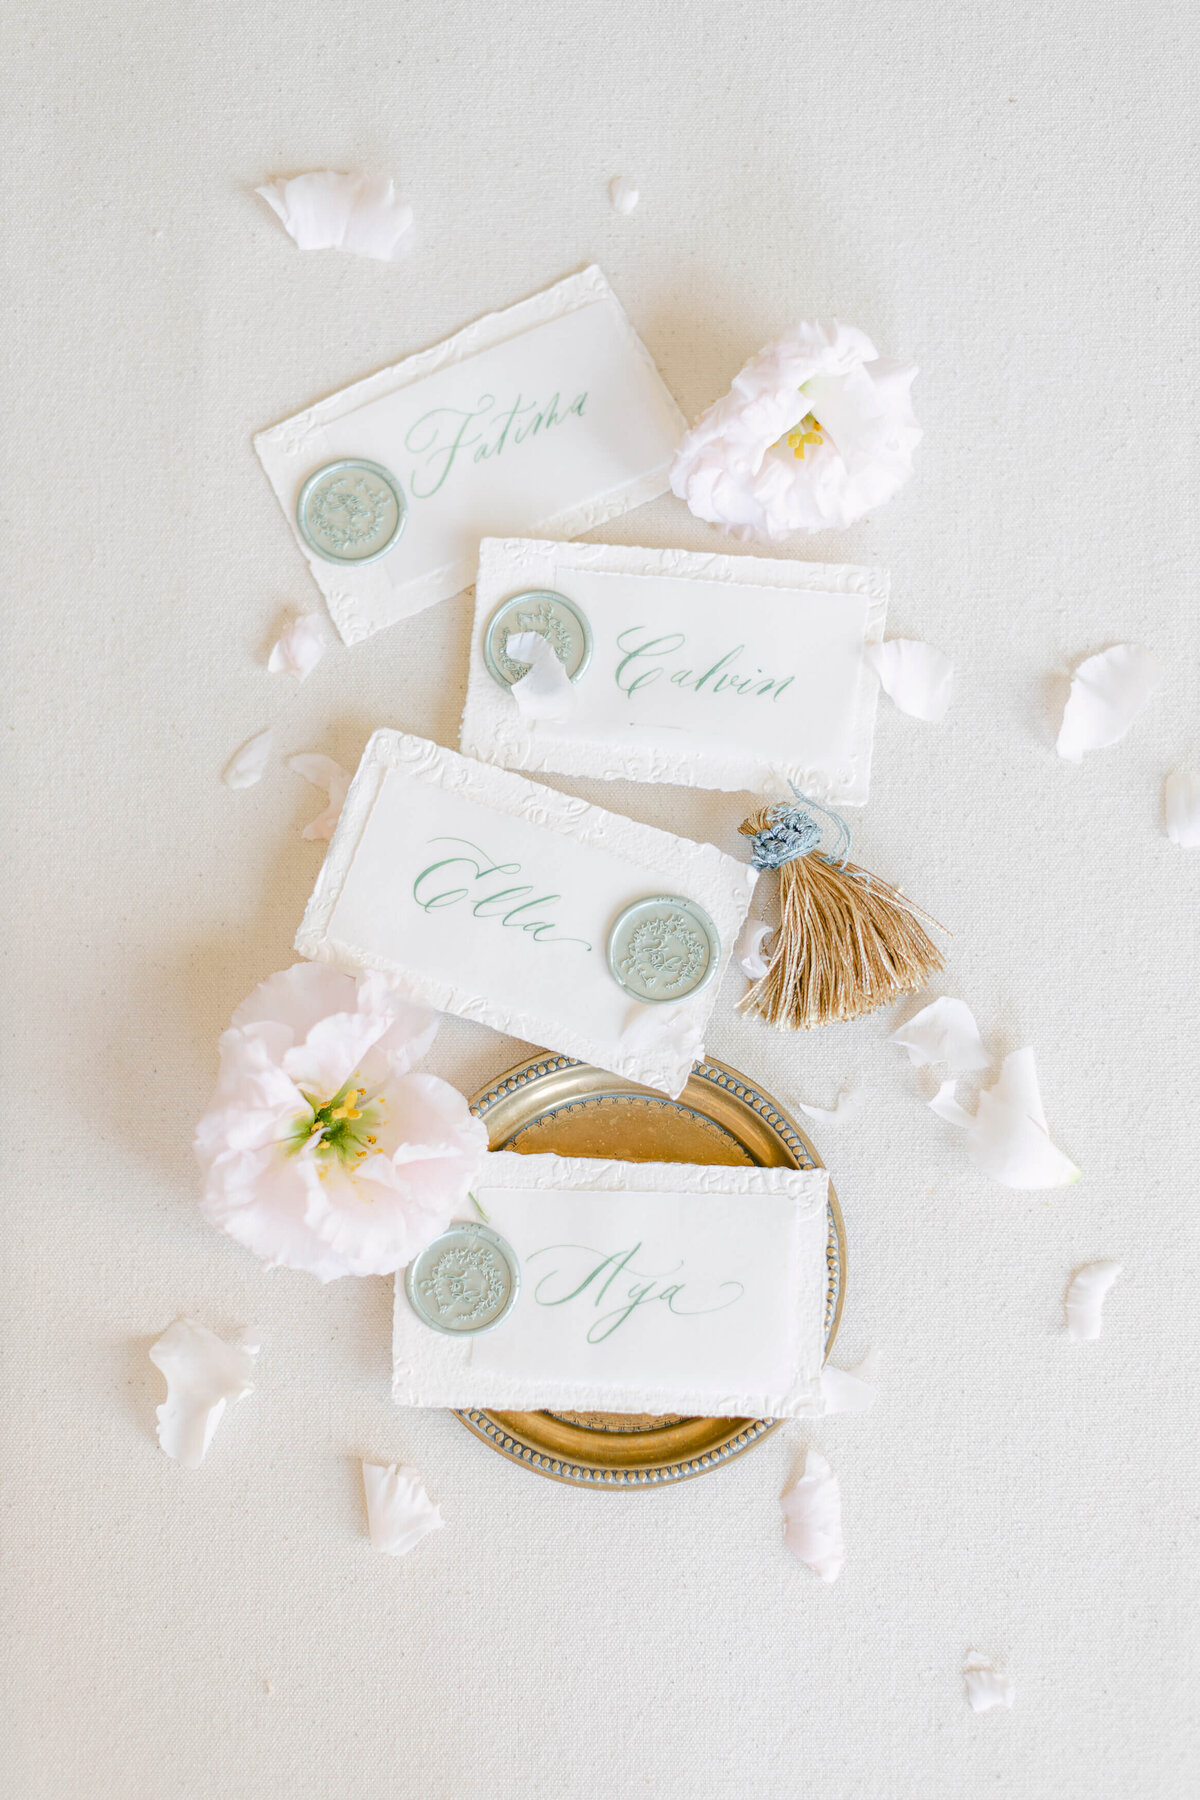 Name cards sit on a soft white background surrounded by flower petals.